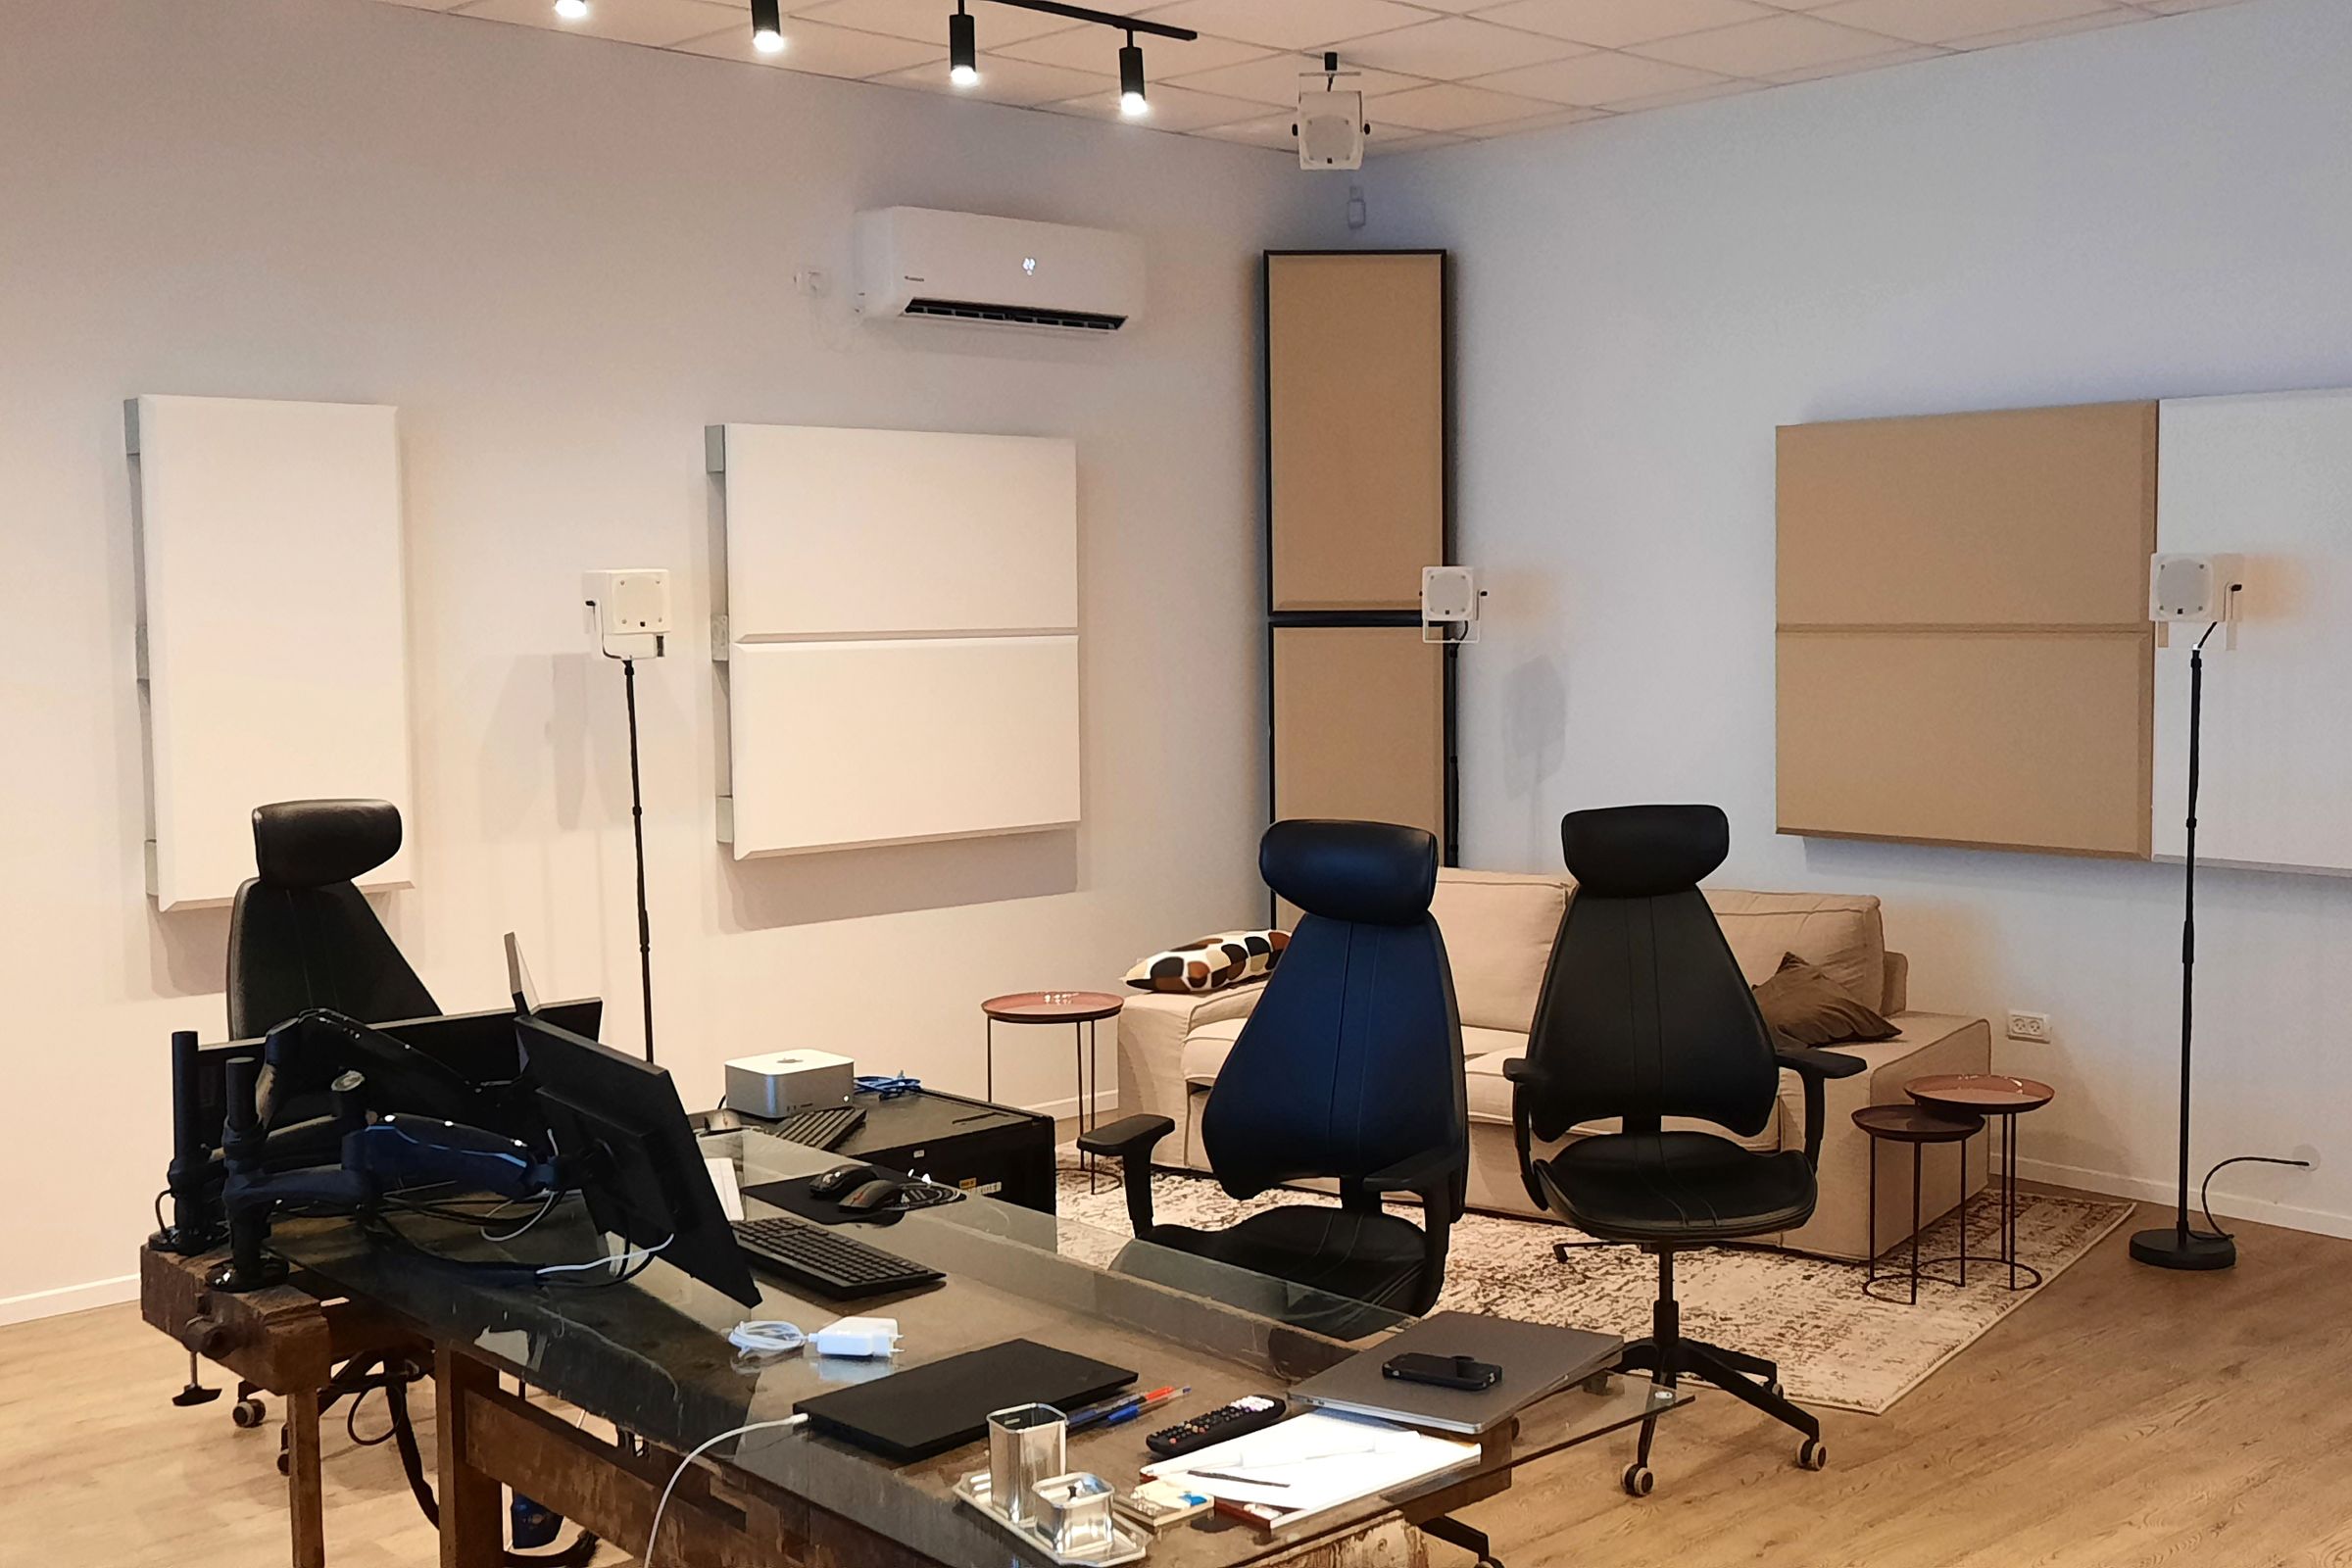 Studio mixing room with beige and white acoustic wall panels, and beige corner mounted bass traps